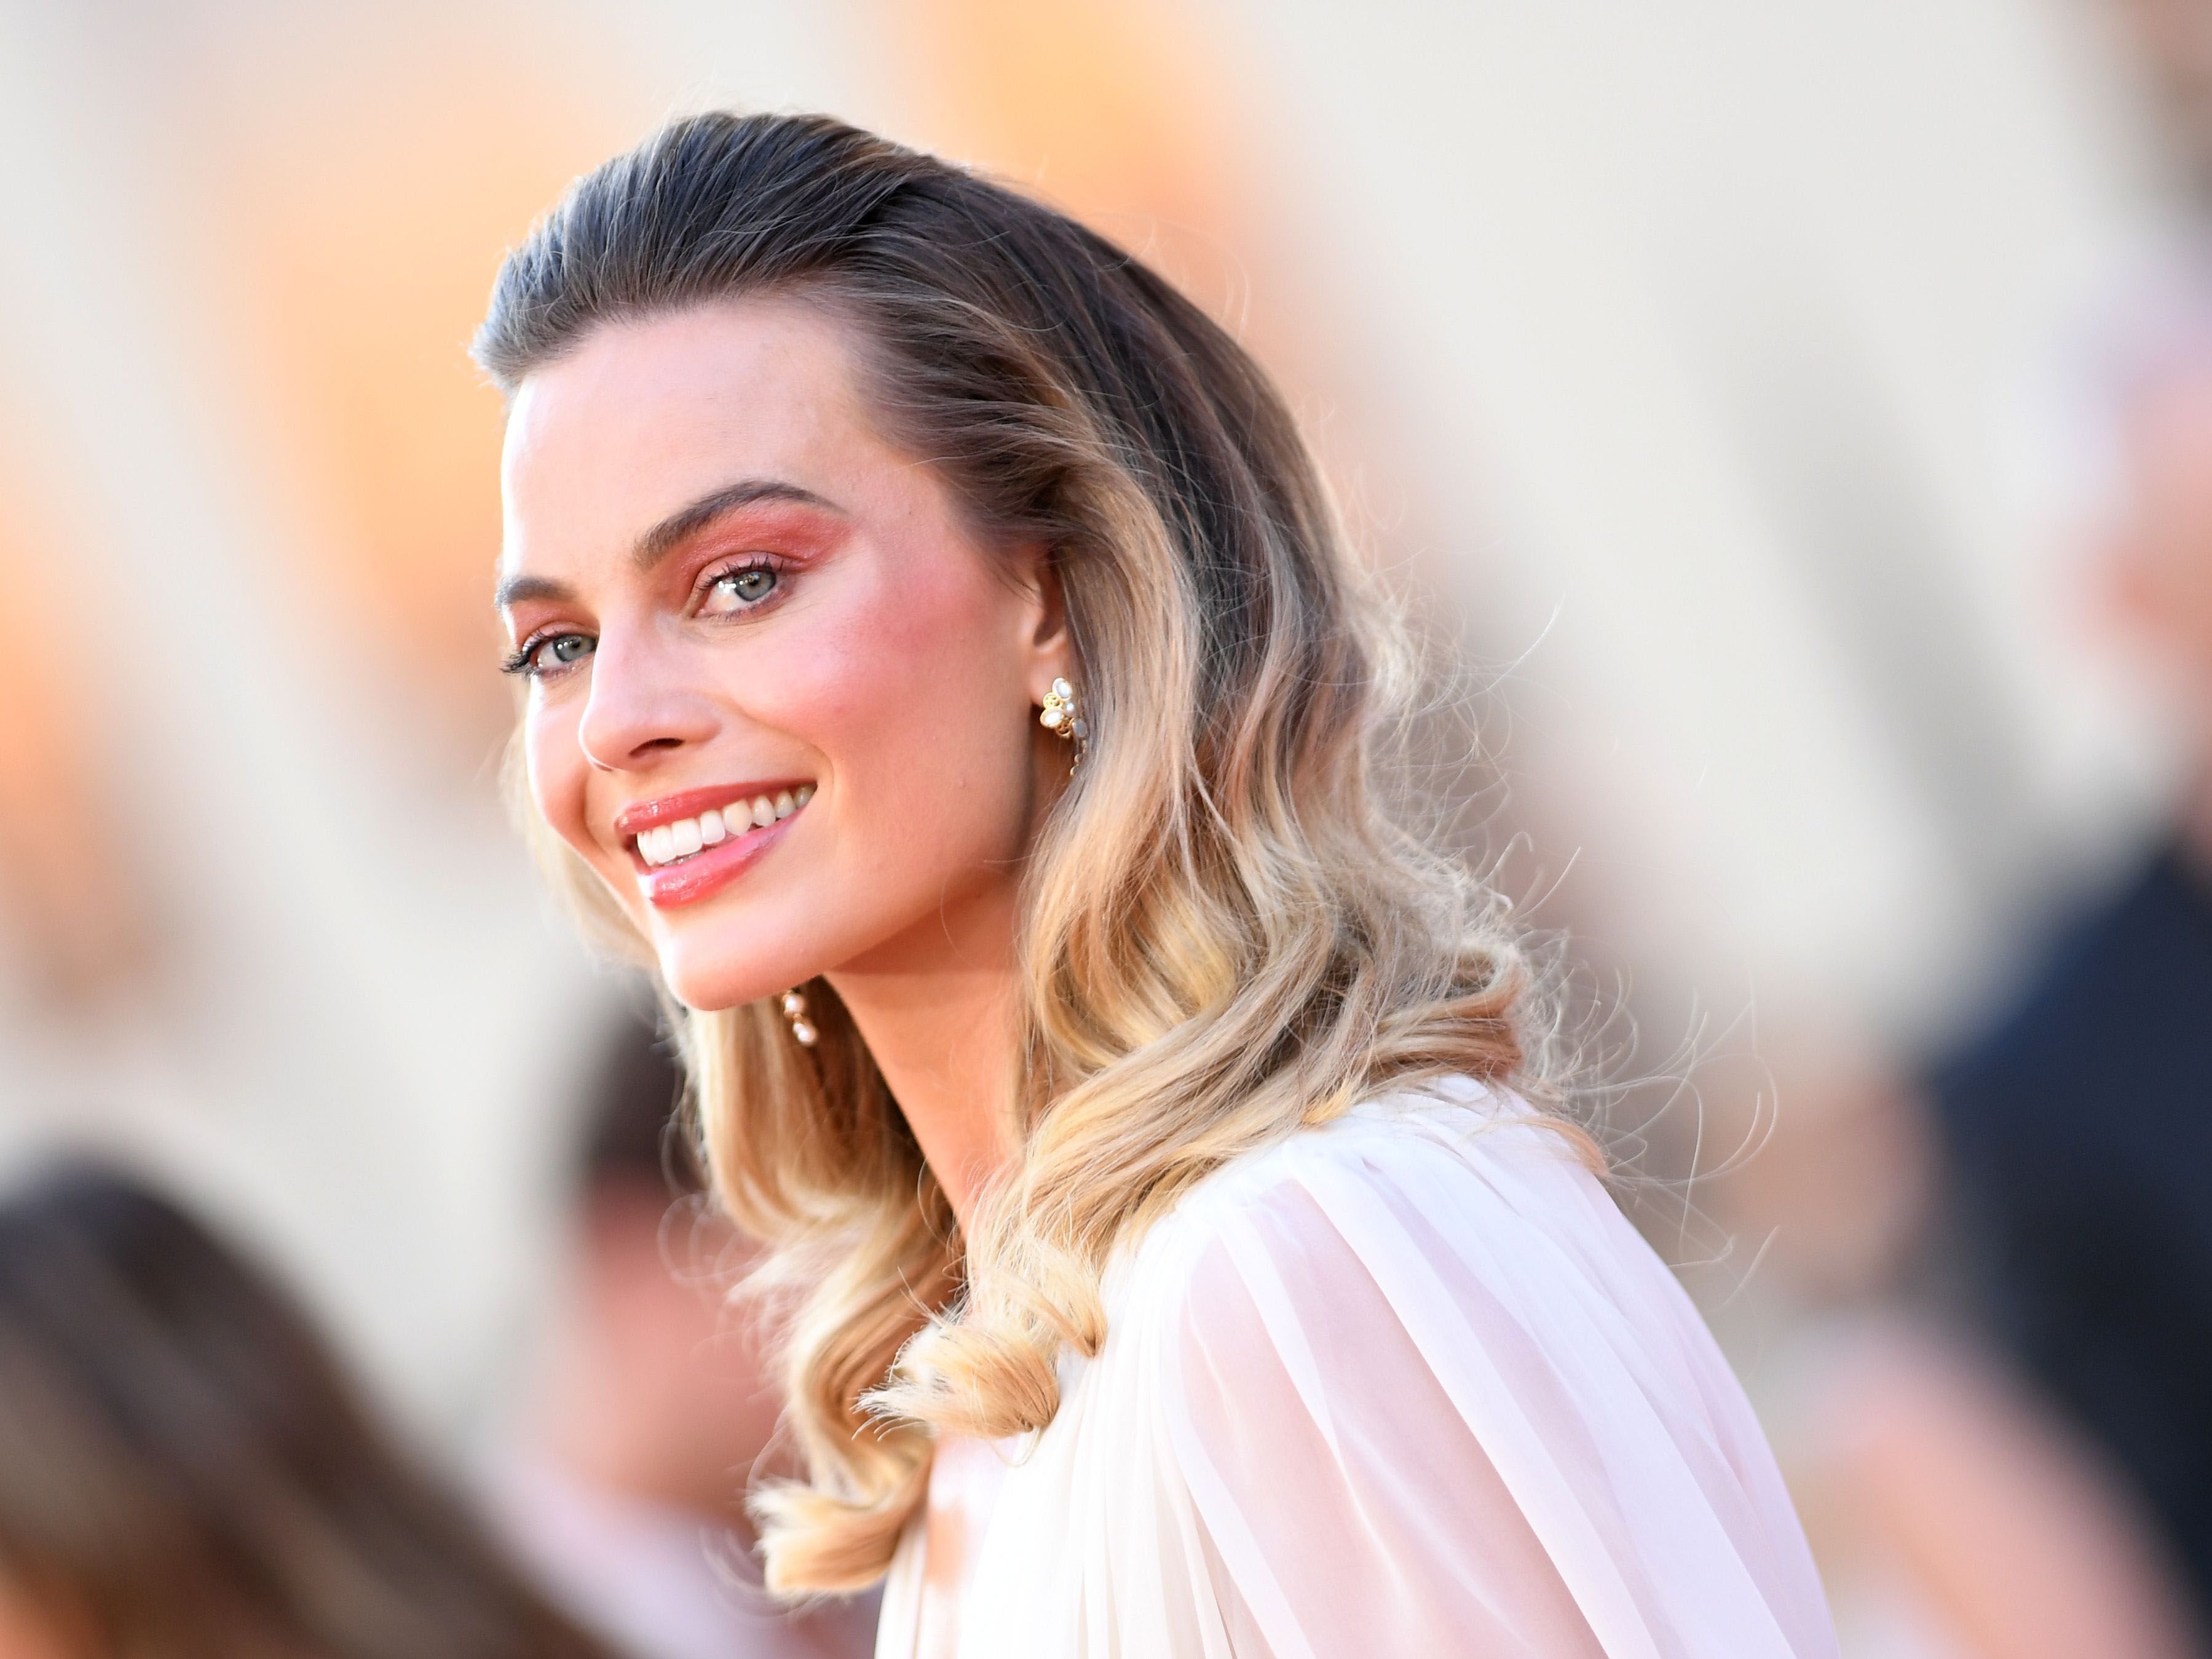 Margot Robbie says she'll bring positivity to new Barbie film